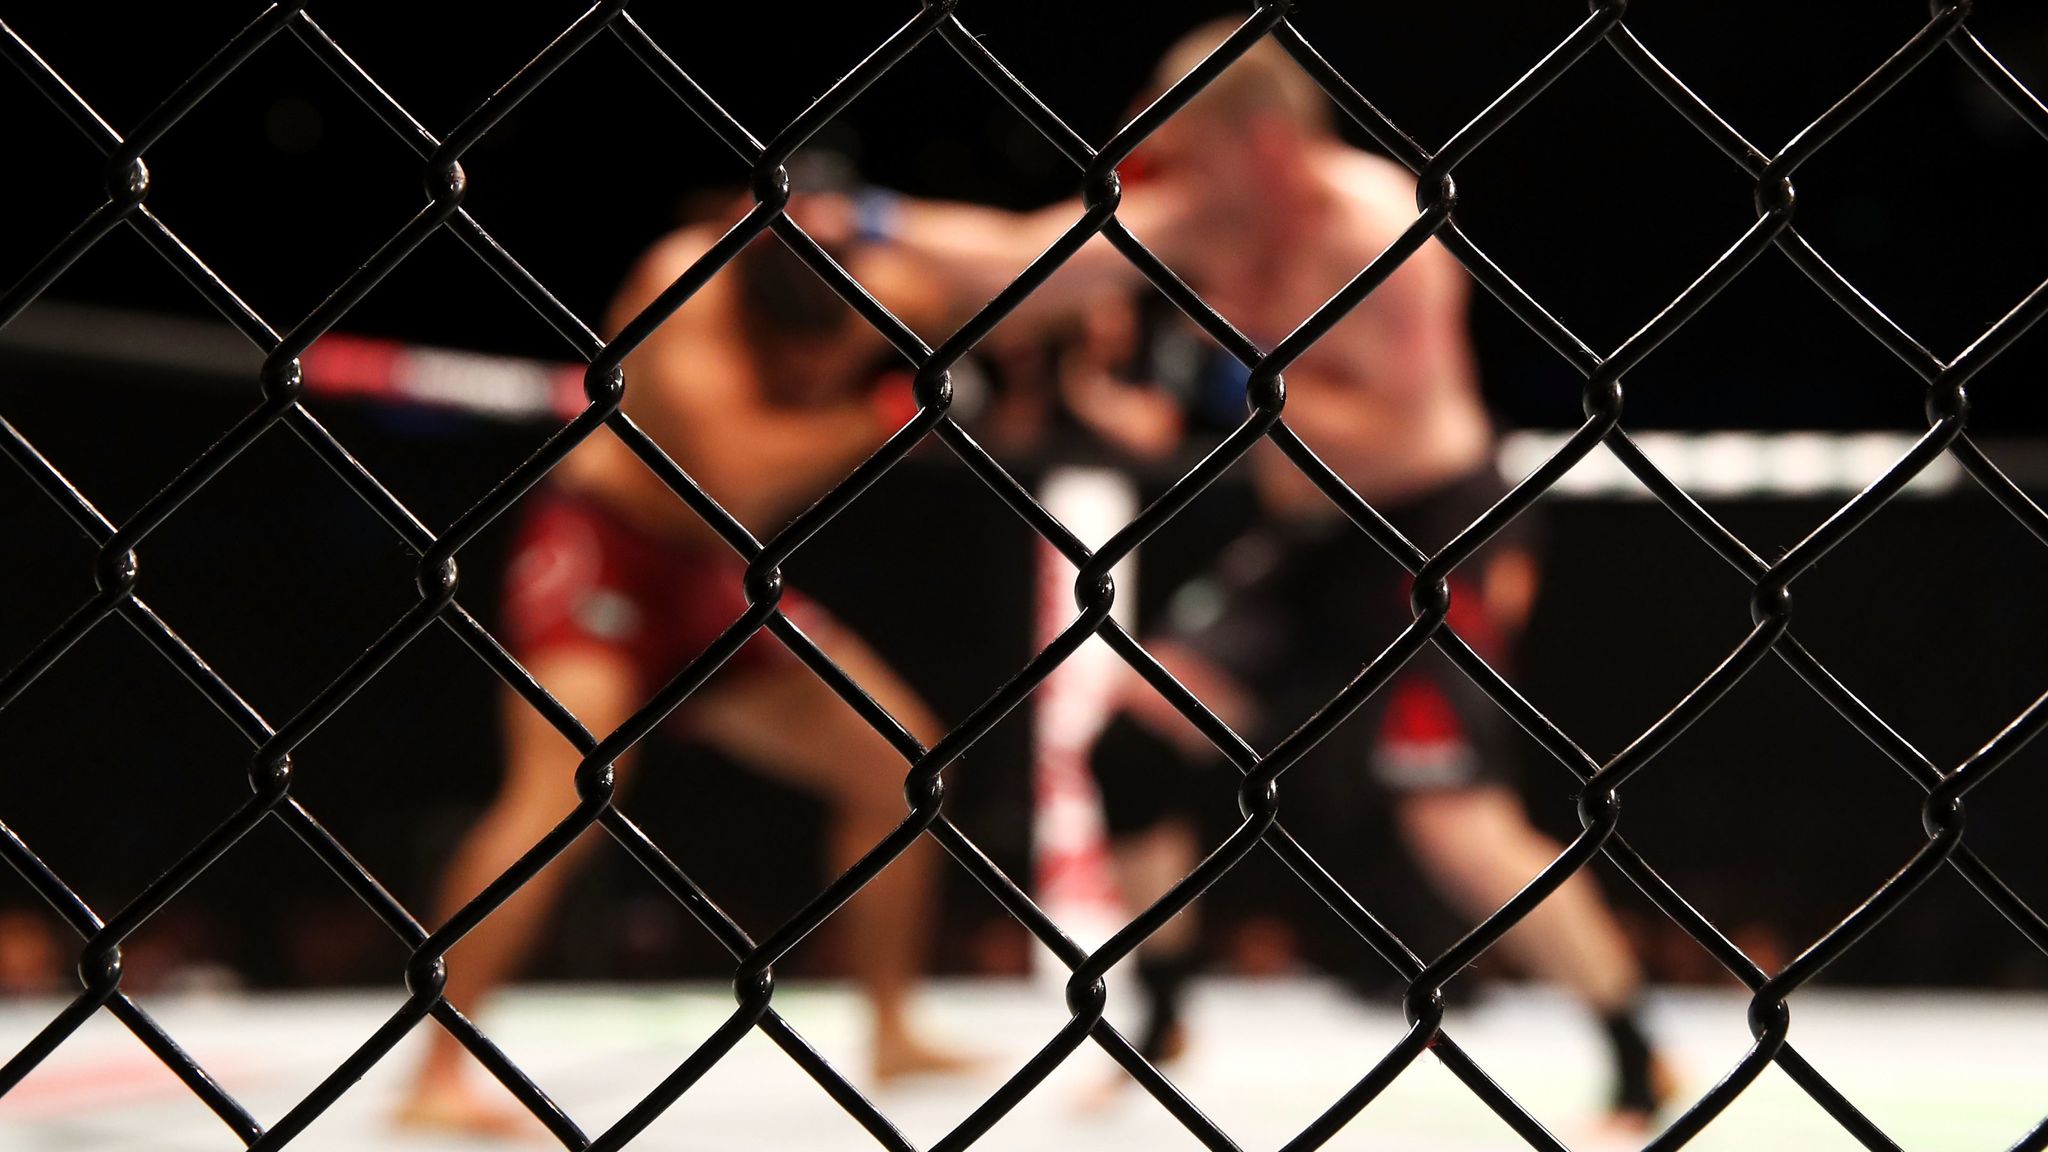 ufc cage fence